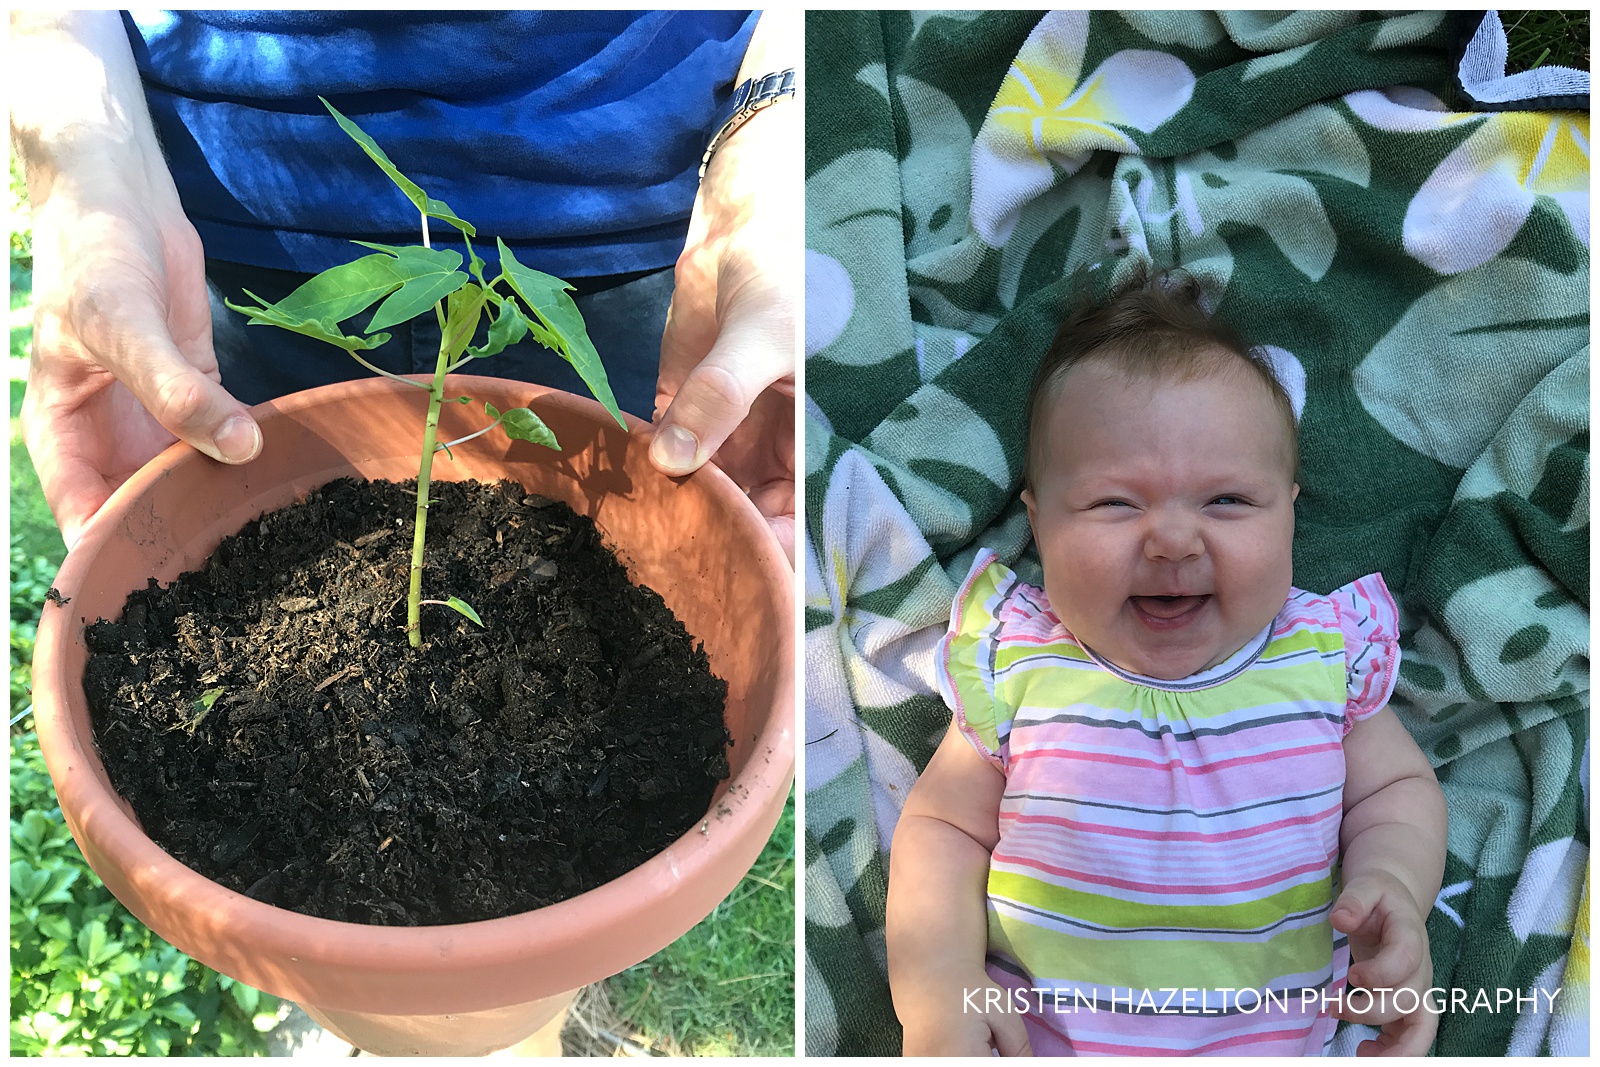 A baby papaya tree and one happy baby with a wide-mouthed smiled